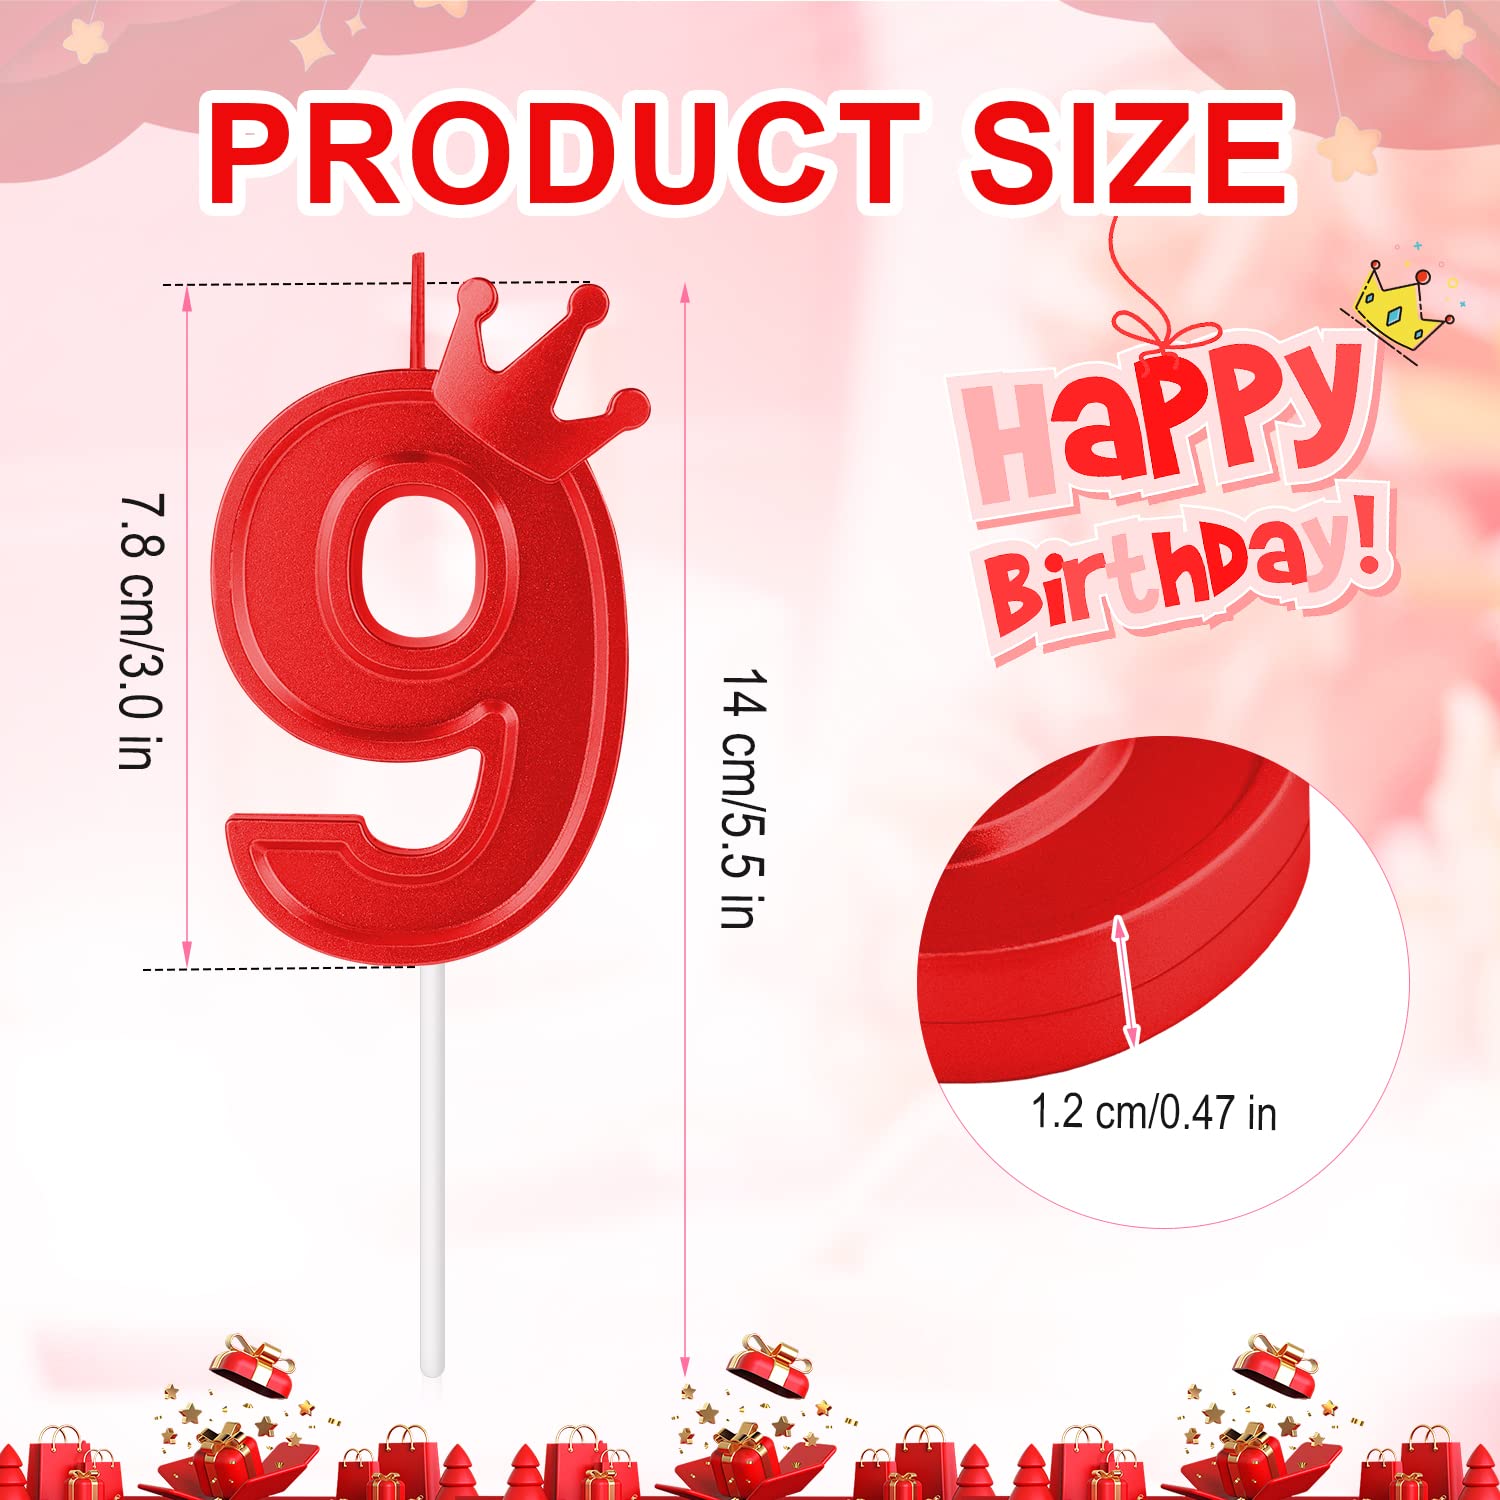 AIEX 3 Inch Birthday Number Candle, Large Birthday Candles 3D Number Candles for Birthday Cakes with Crown Decor Cake Topper Candle for Wedding Valentine Anniversary Festival Party (Red, 9)